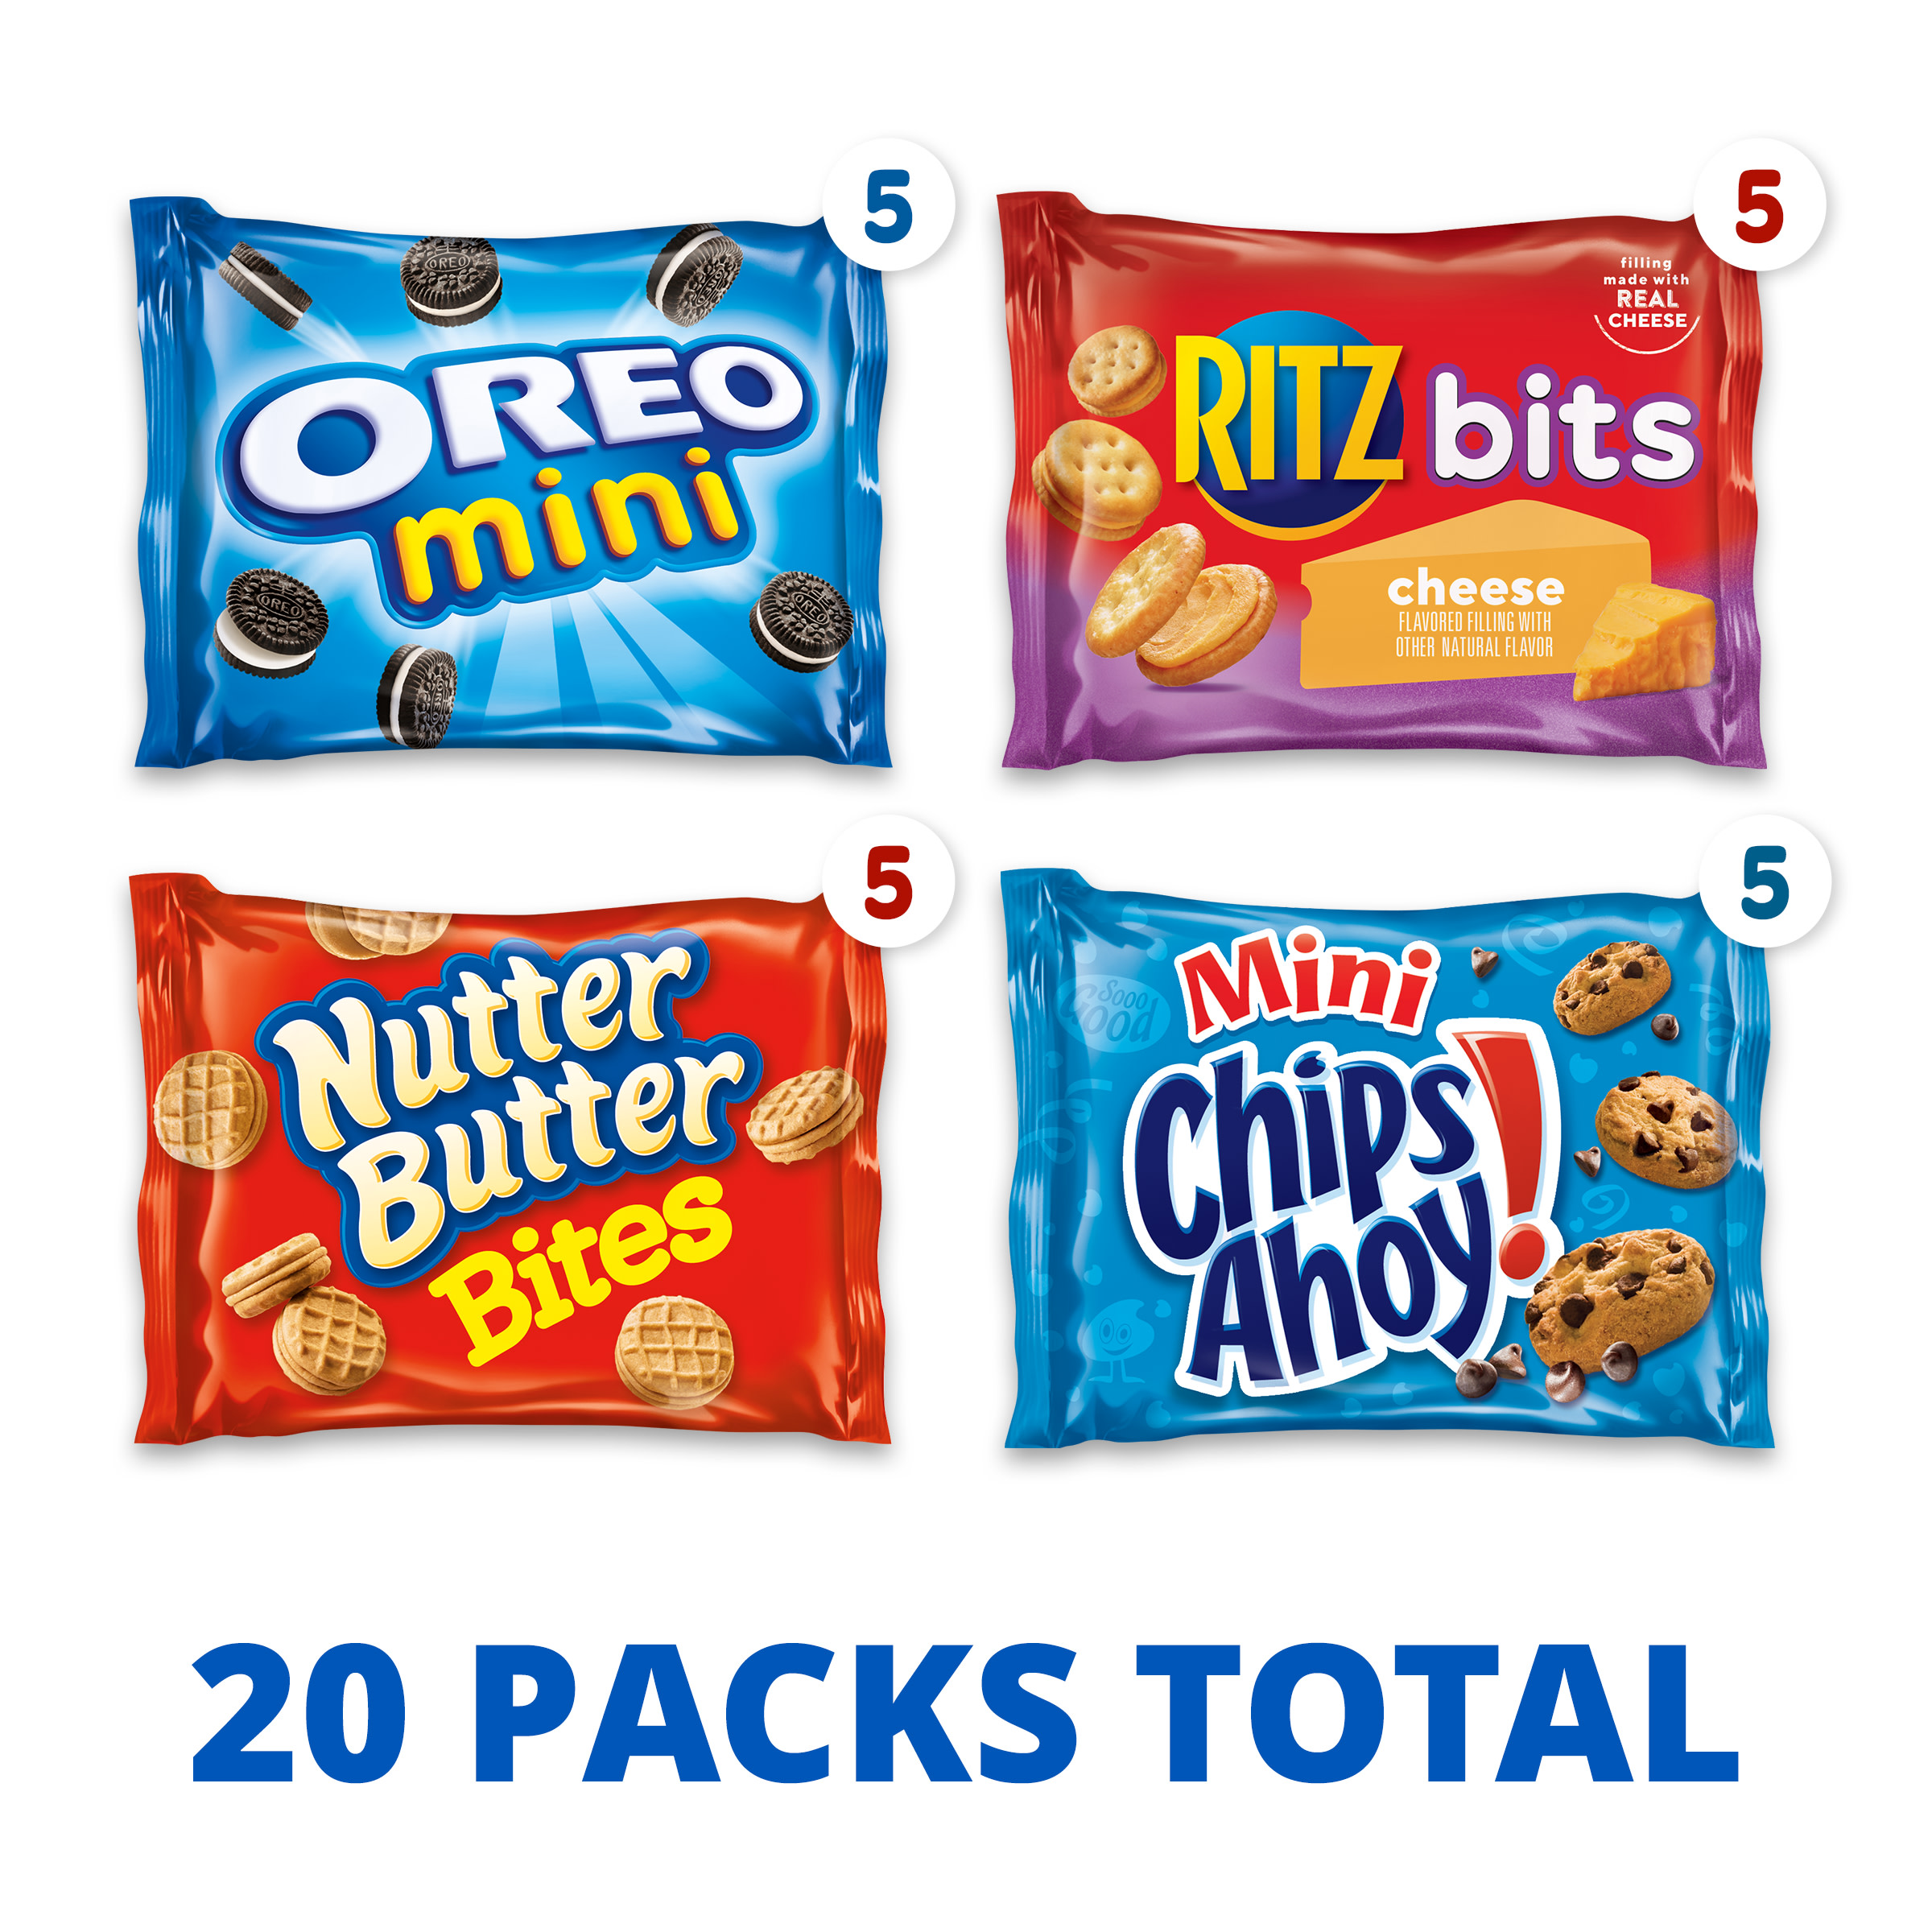 Nabisco Classic Mix Variety Pack, OREO Mini, CHIPS AHOY! Mini, Nutter Butter Bites, RITZ Bits Cheese, Easter Snacks, 20 Snack Packs - image 3 of 12